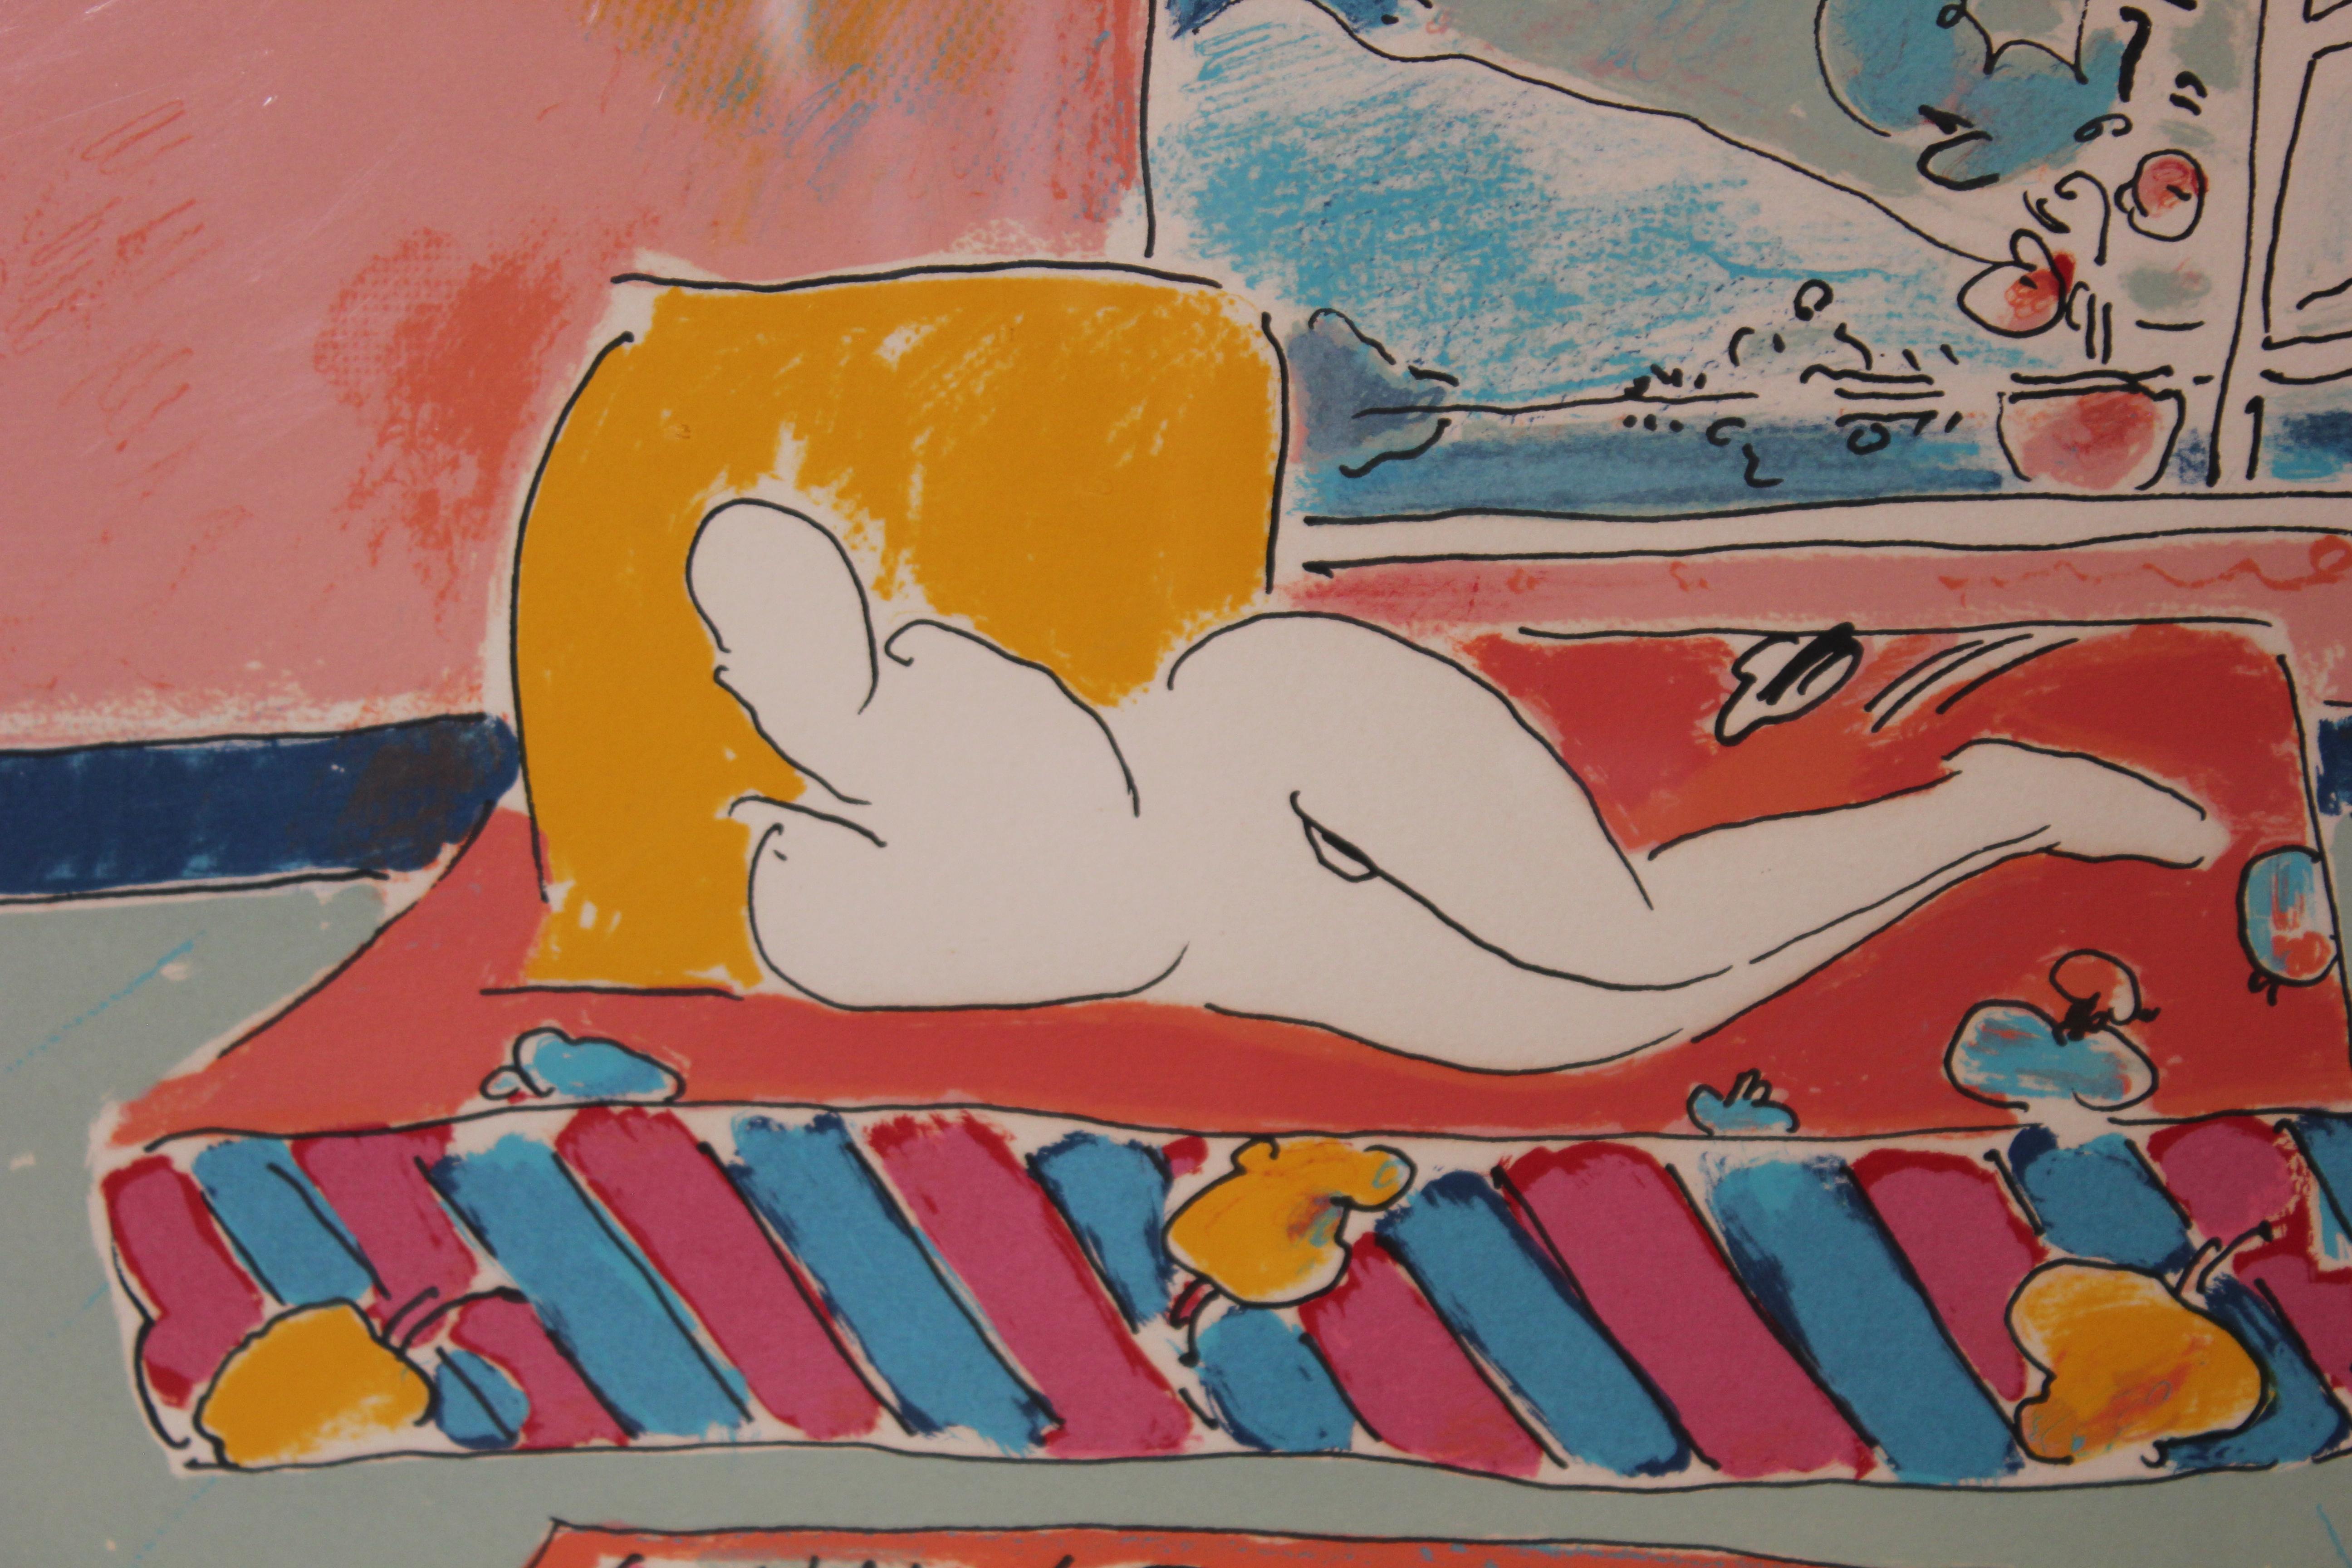 Reclining Nude Colorful Lithograph Edition 107 of 300 - Print by Peter Max